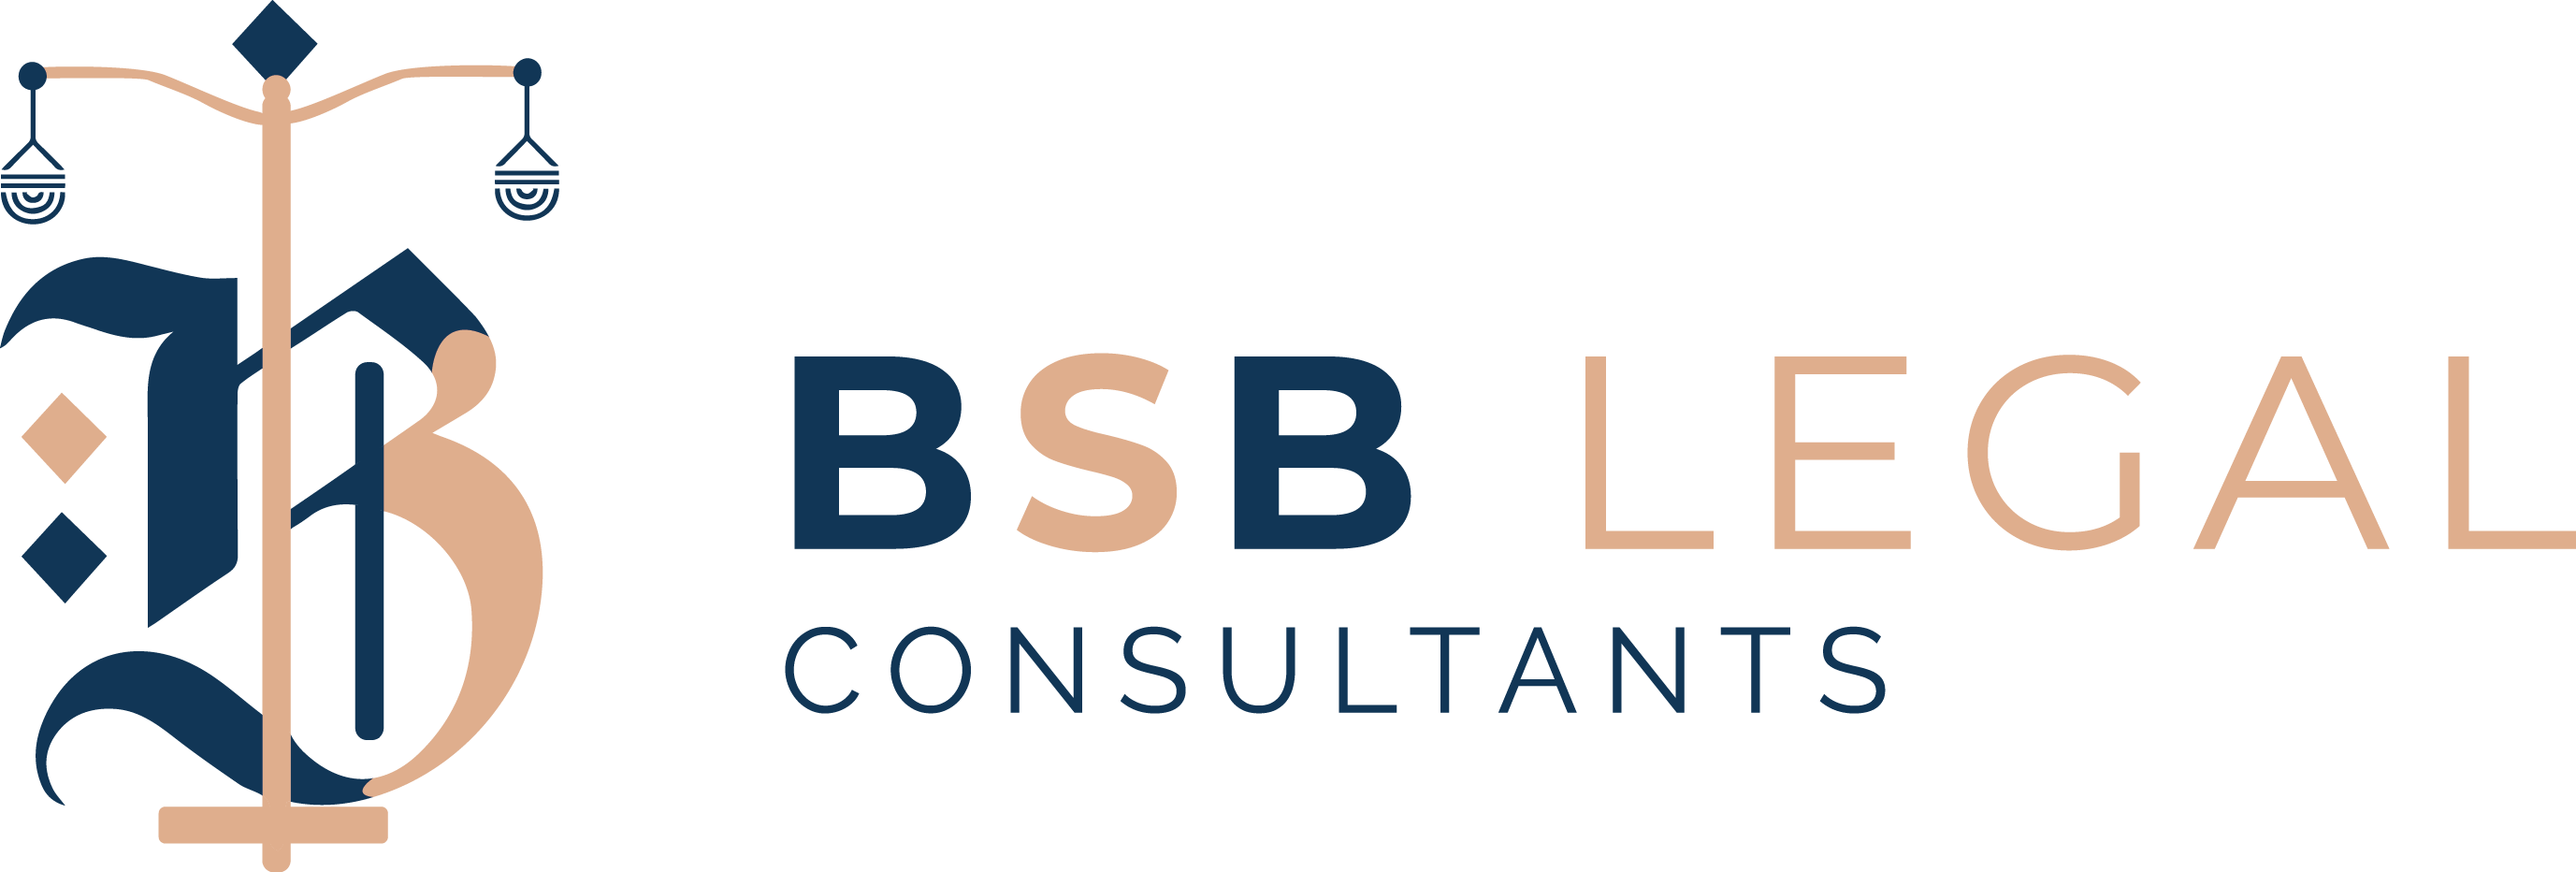 BSB LEGAL CONSULTANTS